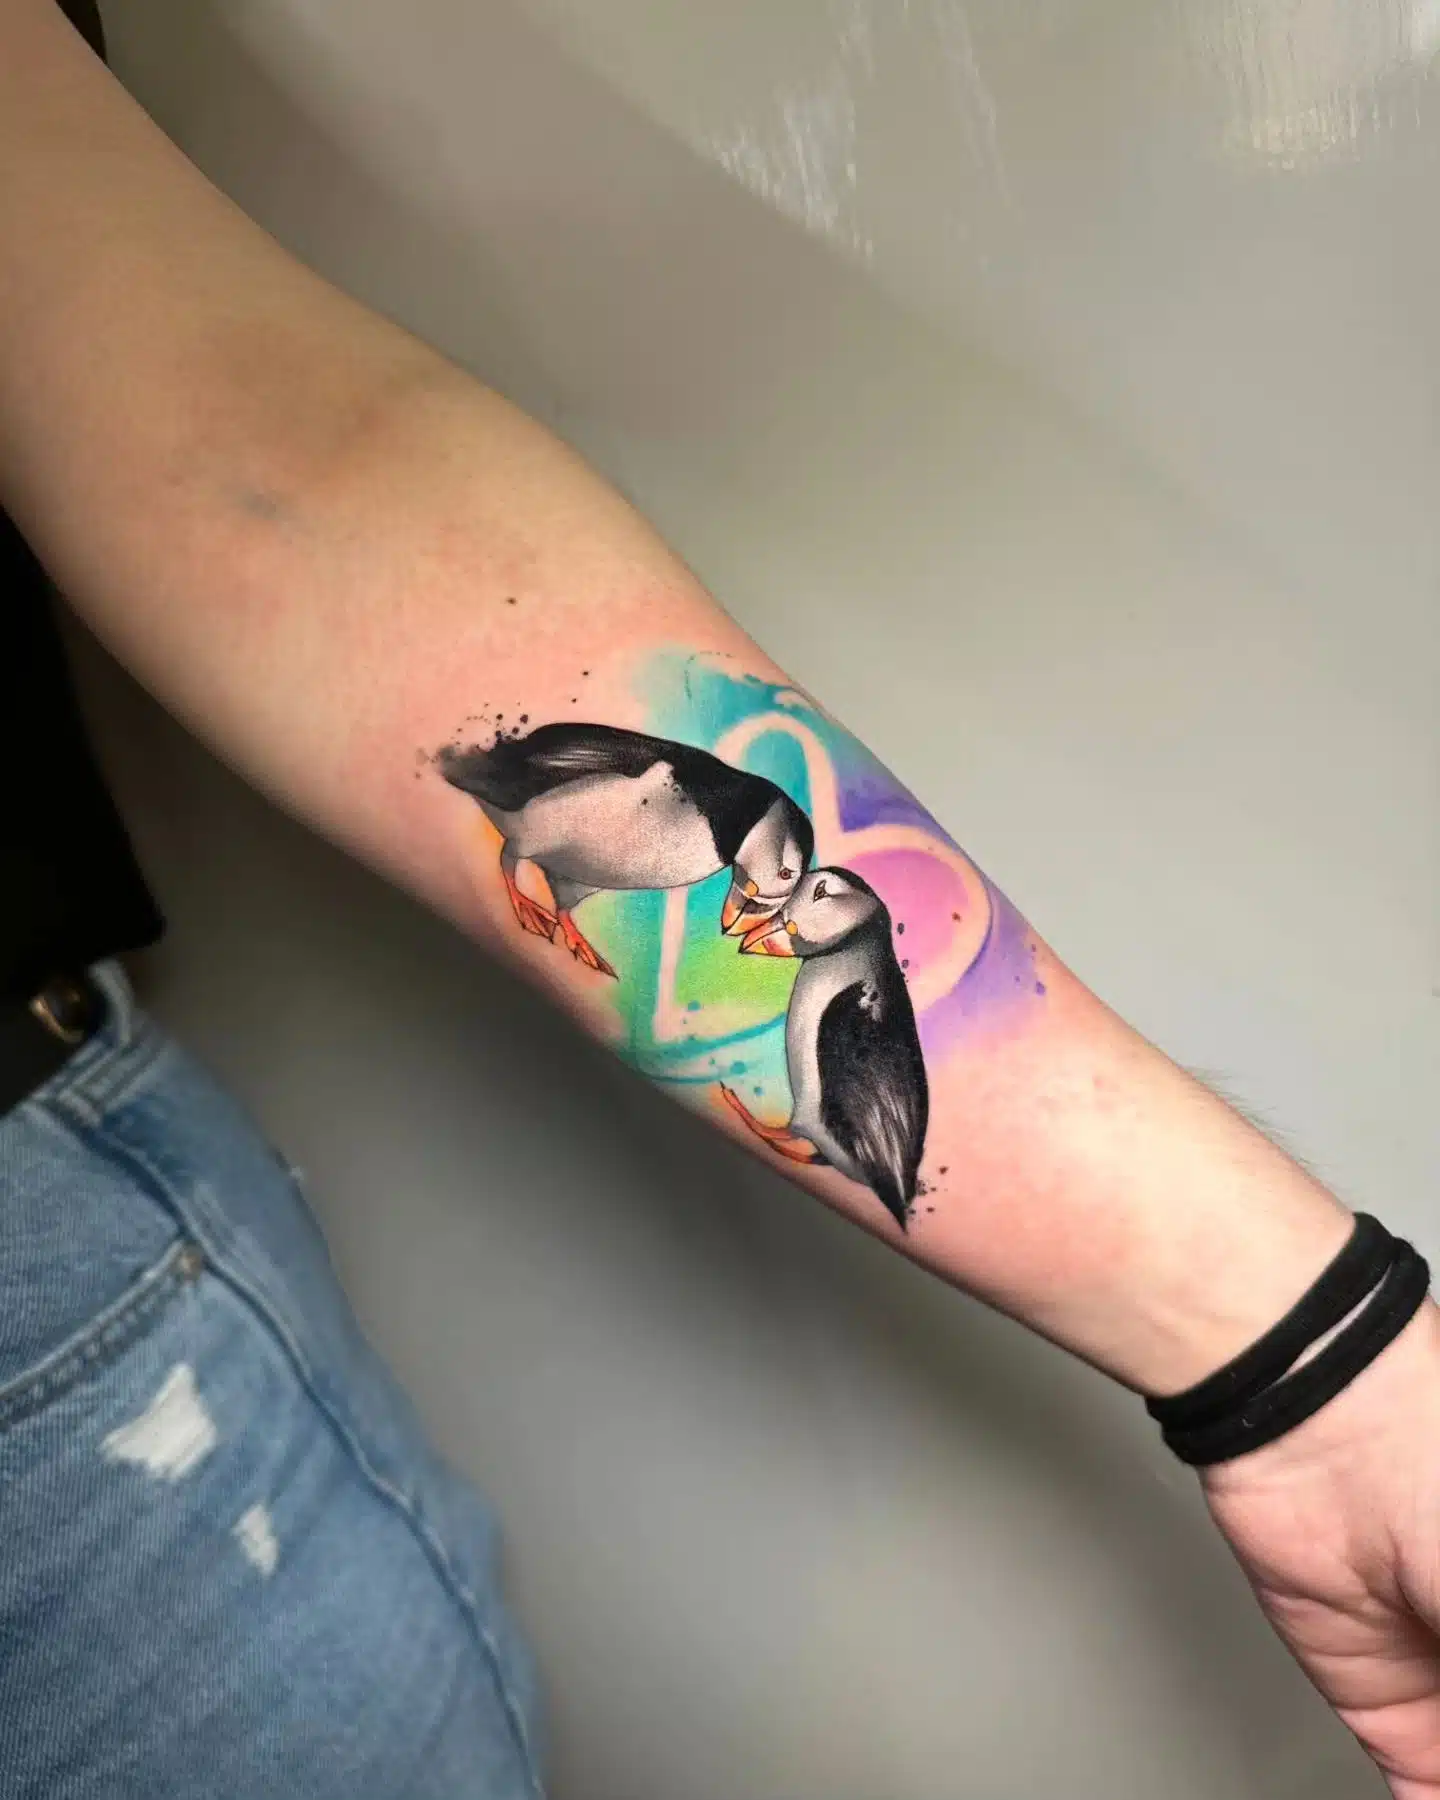 A wee pair of puffins done today by Noemi for Margarita! Love this one ❤️ 
noemi_tattoo 

Supplies from our sponsors:
magnumtattoosupplies.uk

Done using Noemis sponsors:
dragonhawkofficial

With help from:
worldfamousink
allegoryink 
unigloves 

   totaltattoo  uktta  tattoosnob             